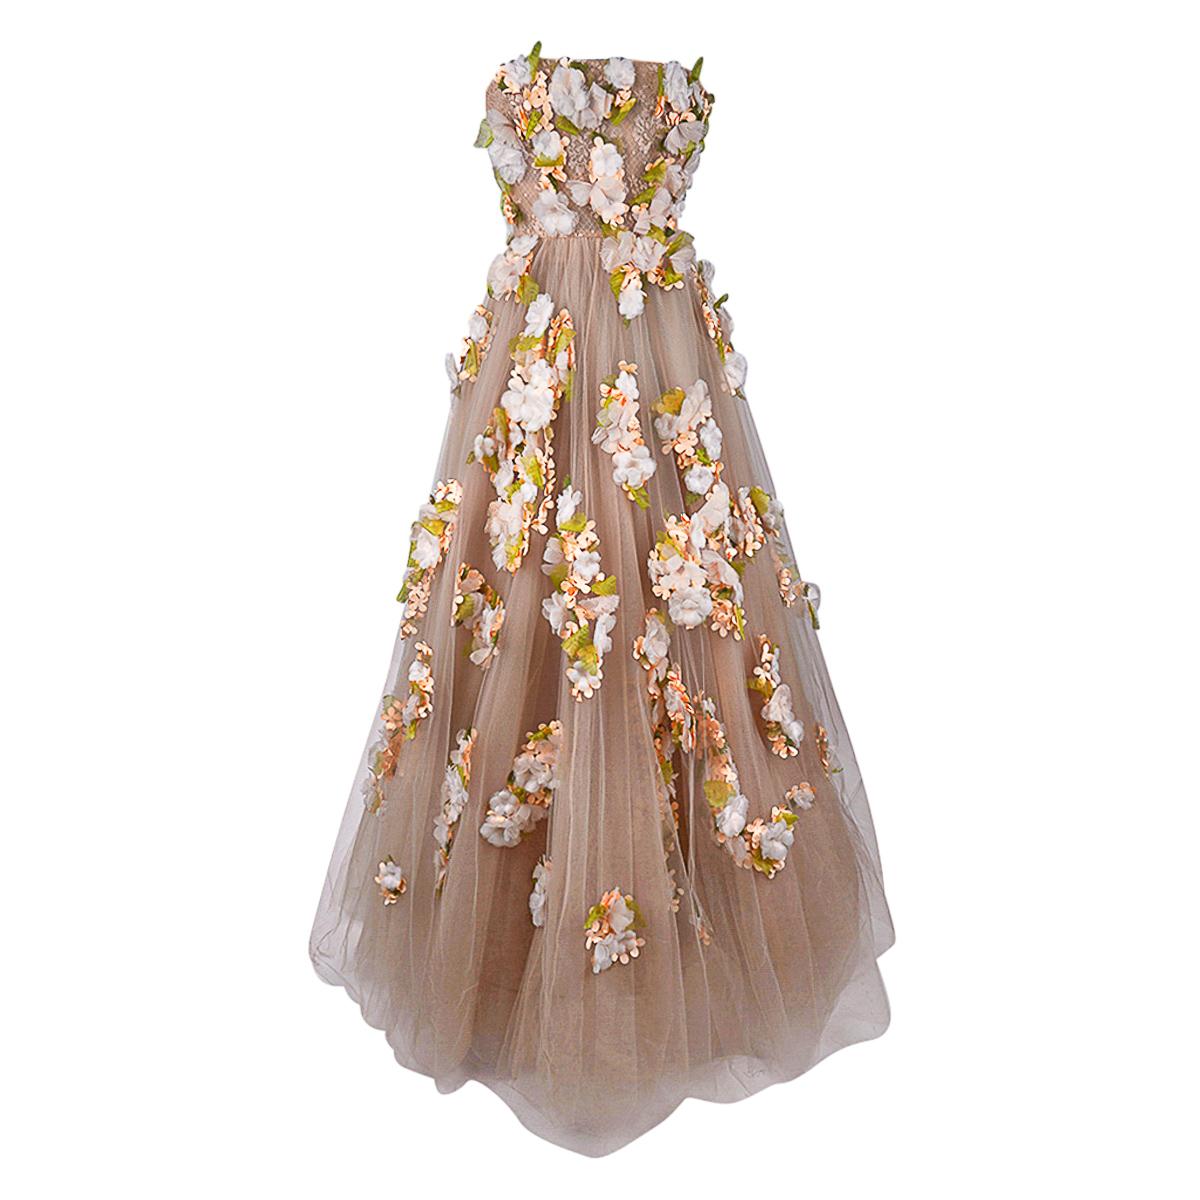 Valentino Strapless Empire Nude Flower Adorned Gown 1 of 2 Size 0 For Sale 6